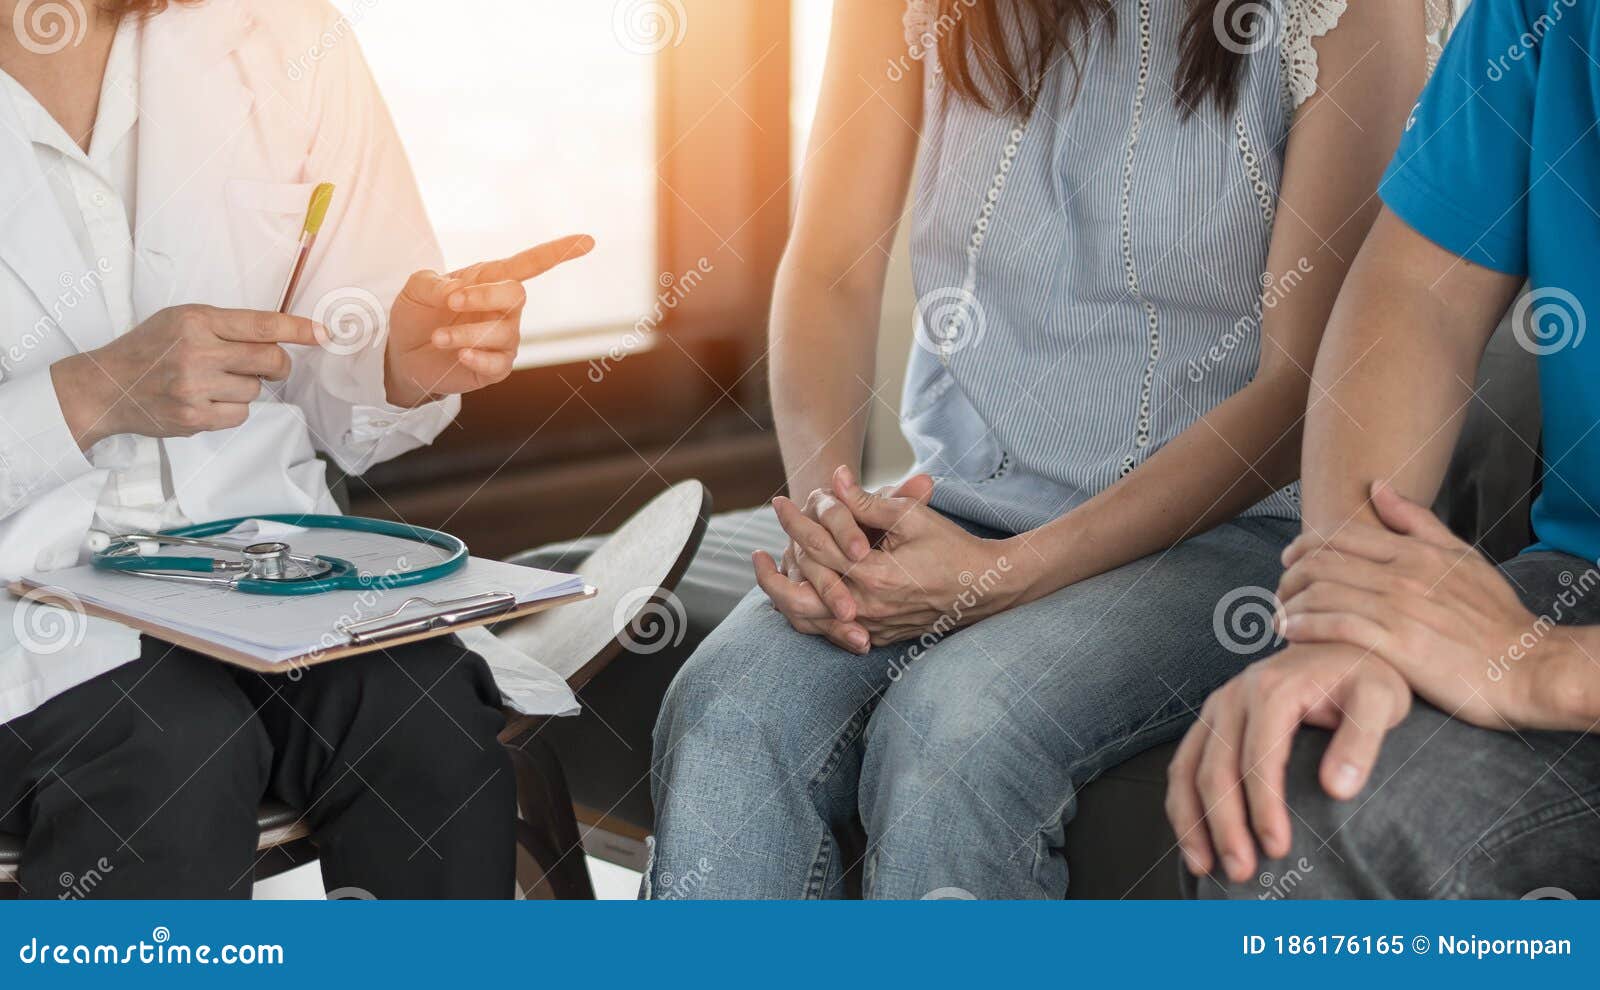 patient couple having doctor or psychologist consulting on marriage counseling, family medical healthcare therapy